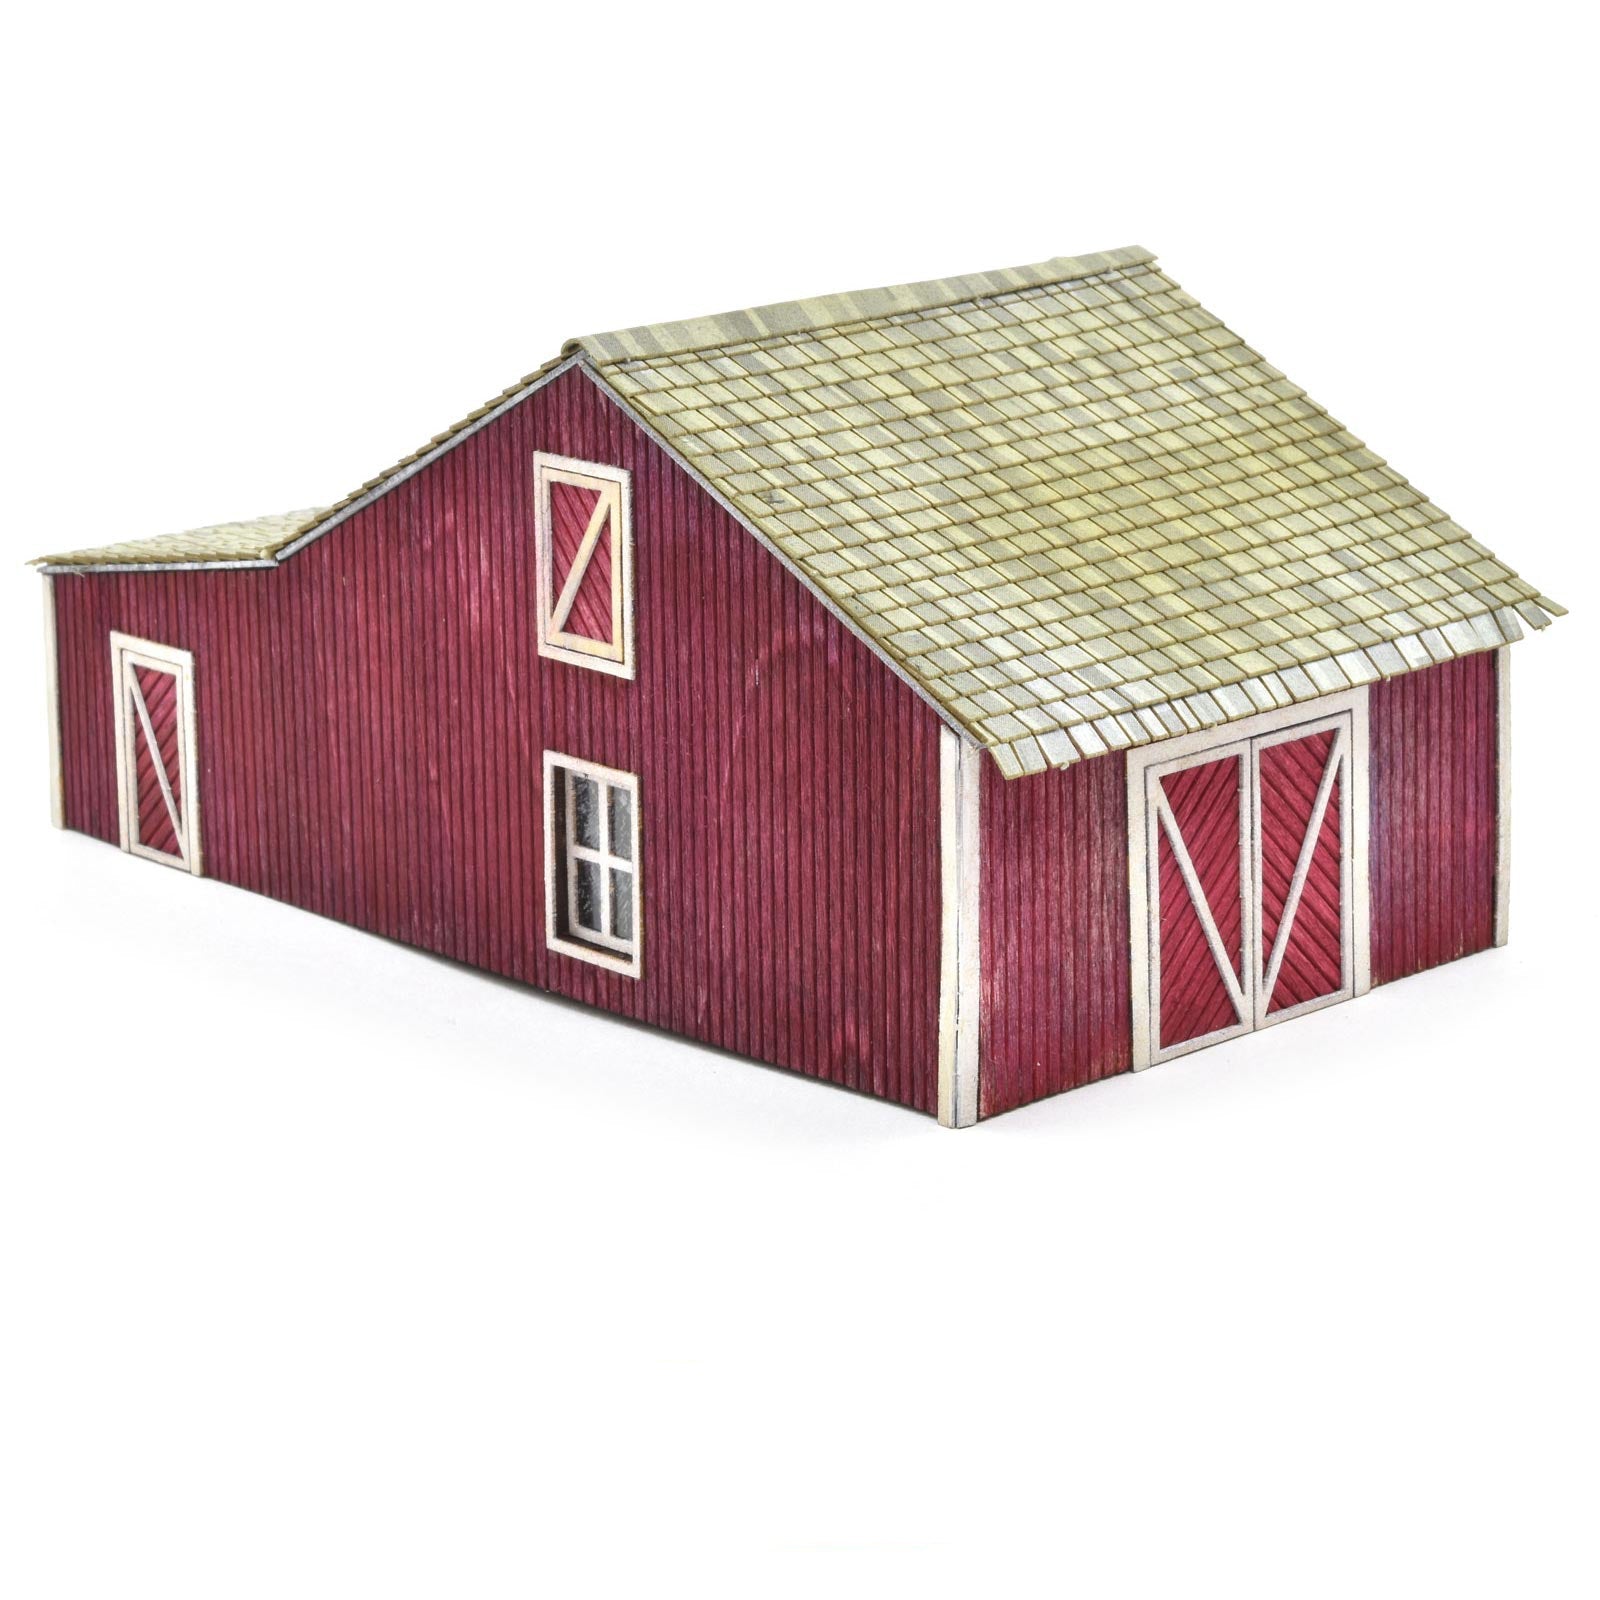 Horse Stable, HO Scale, By Scientific